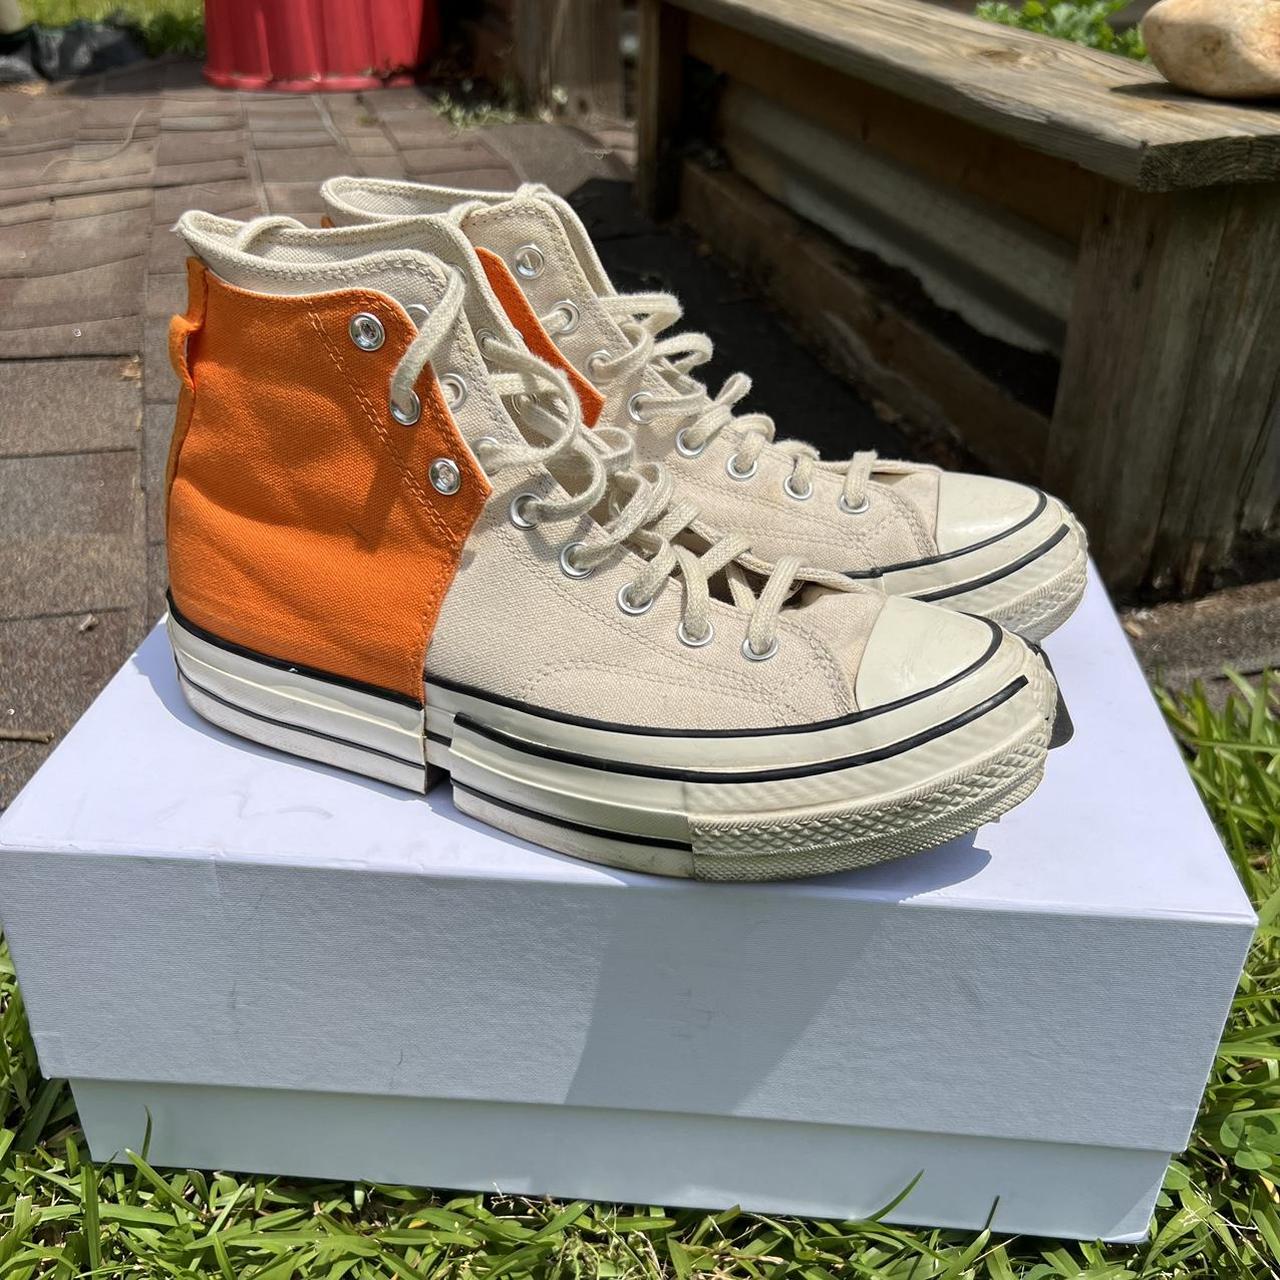 Feng Chen Wang Men's White and Orange Trainers (2)